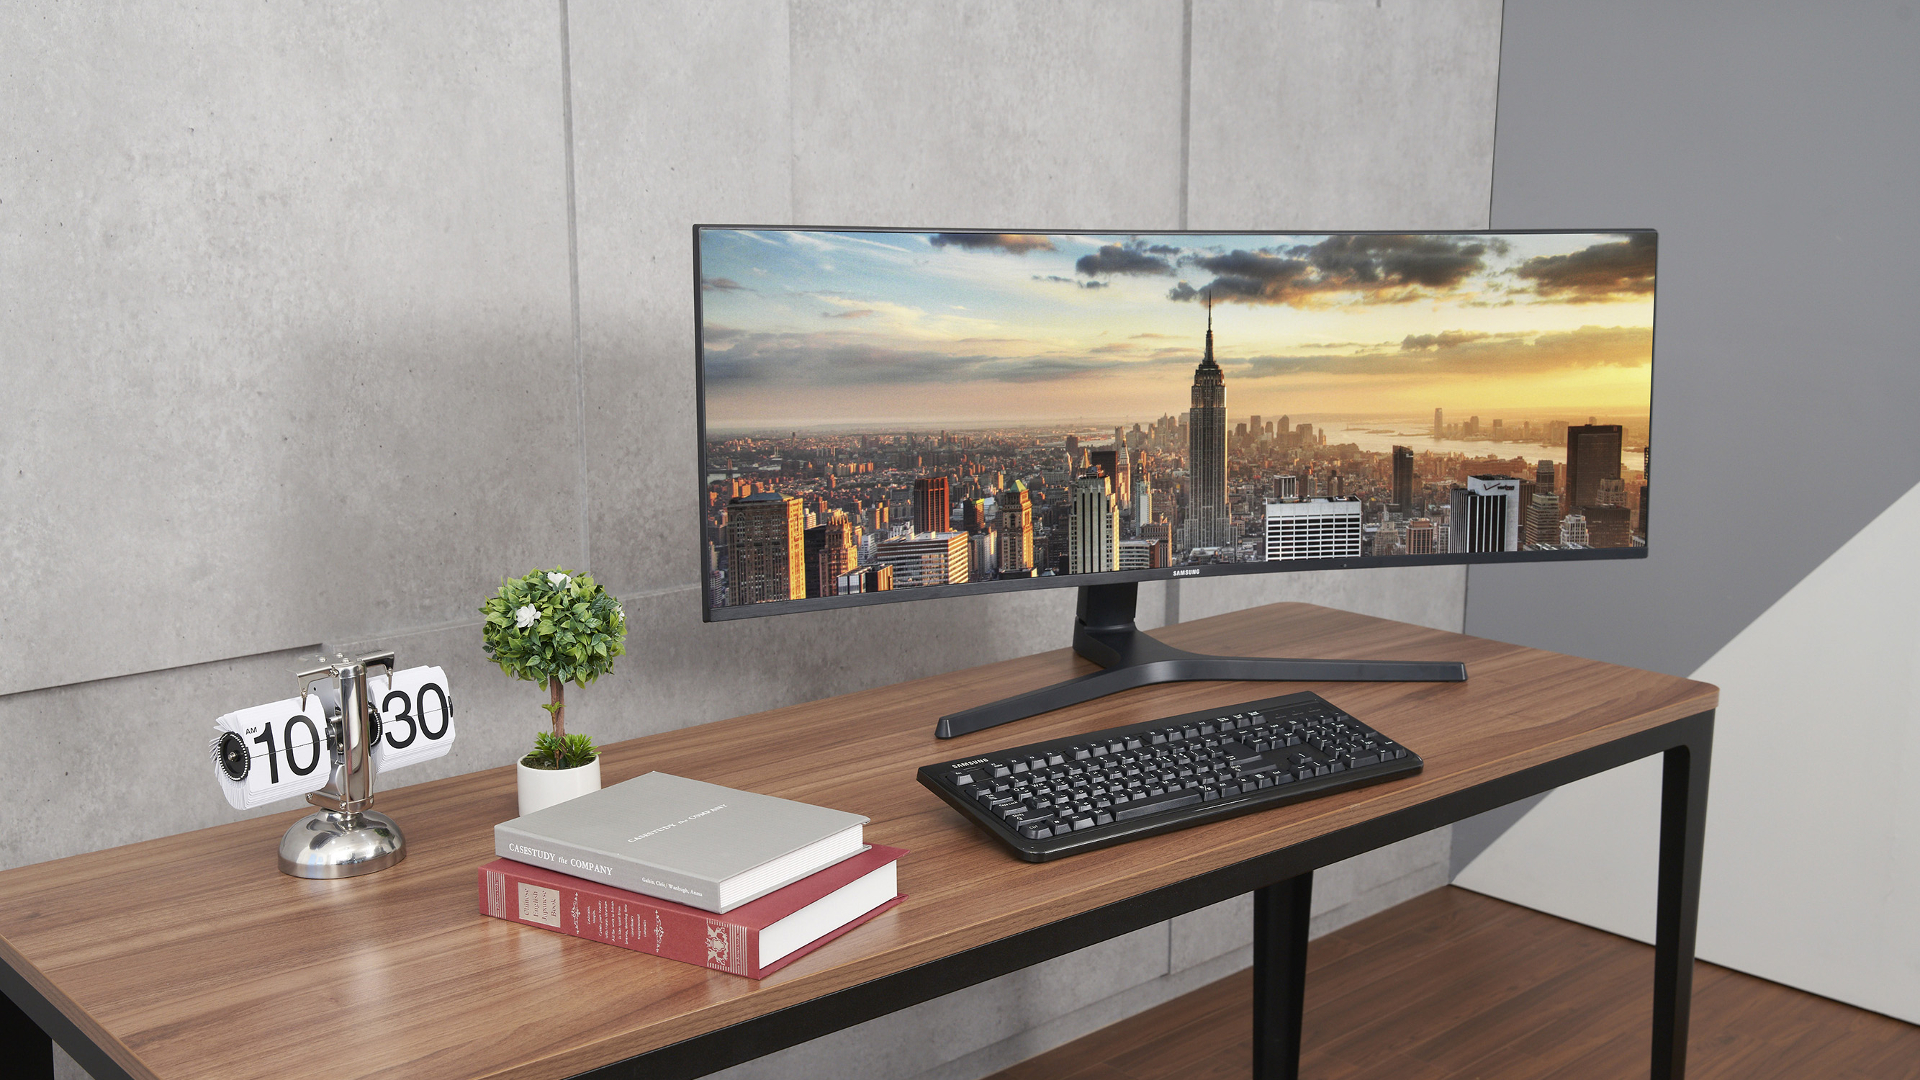 Samsung’s 34inch ultrawide curved monitor boasts Thunderbolt 3